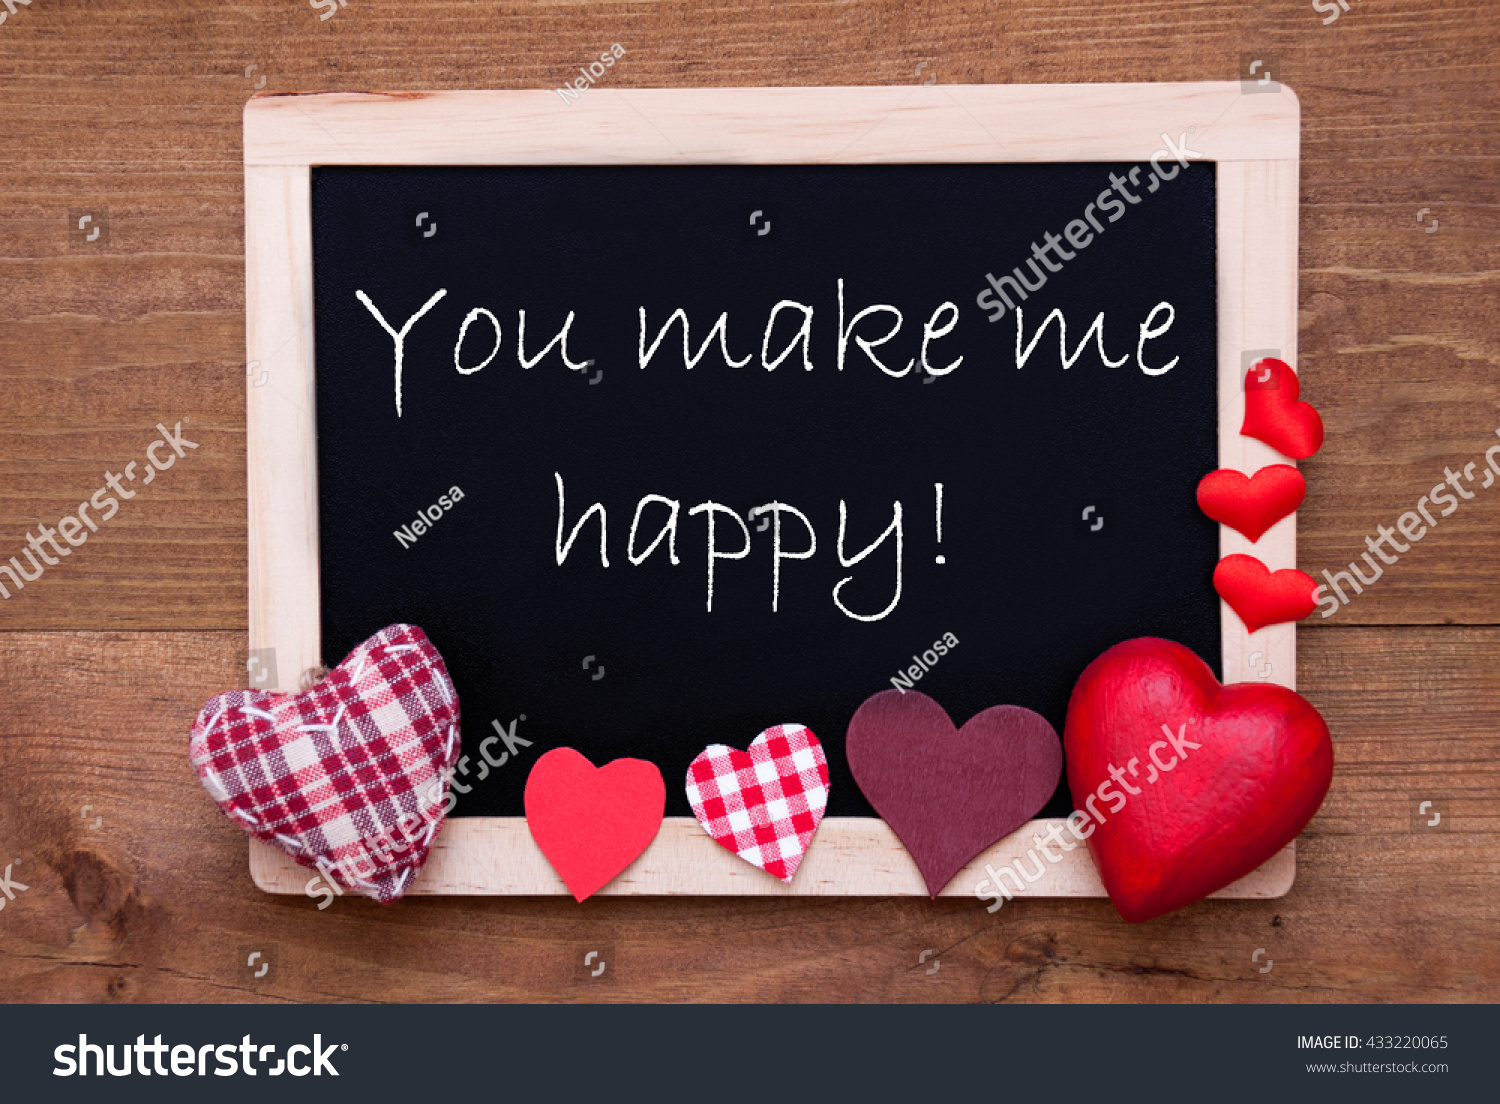 Blackboard With Textile Hearts, Quote You Make Me Happy #433220065